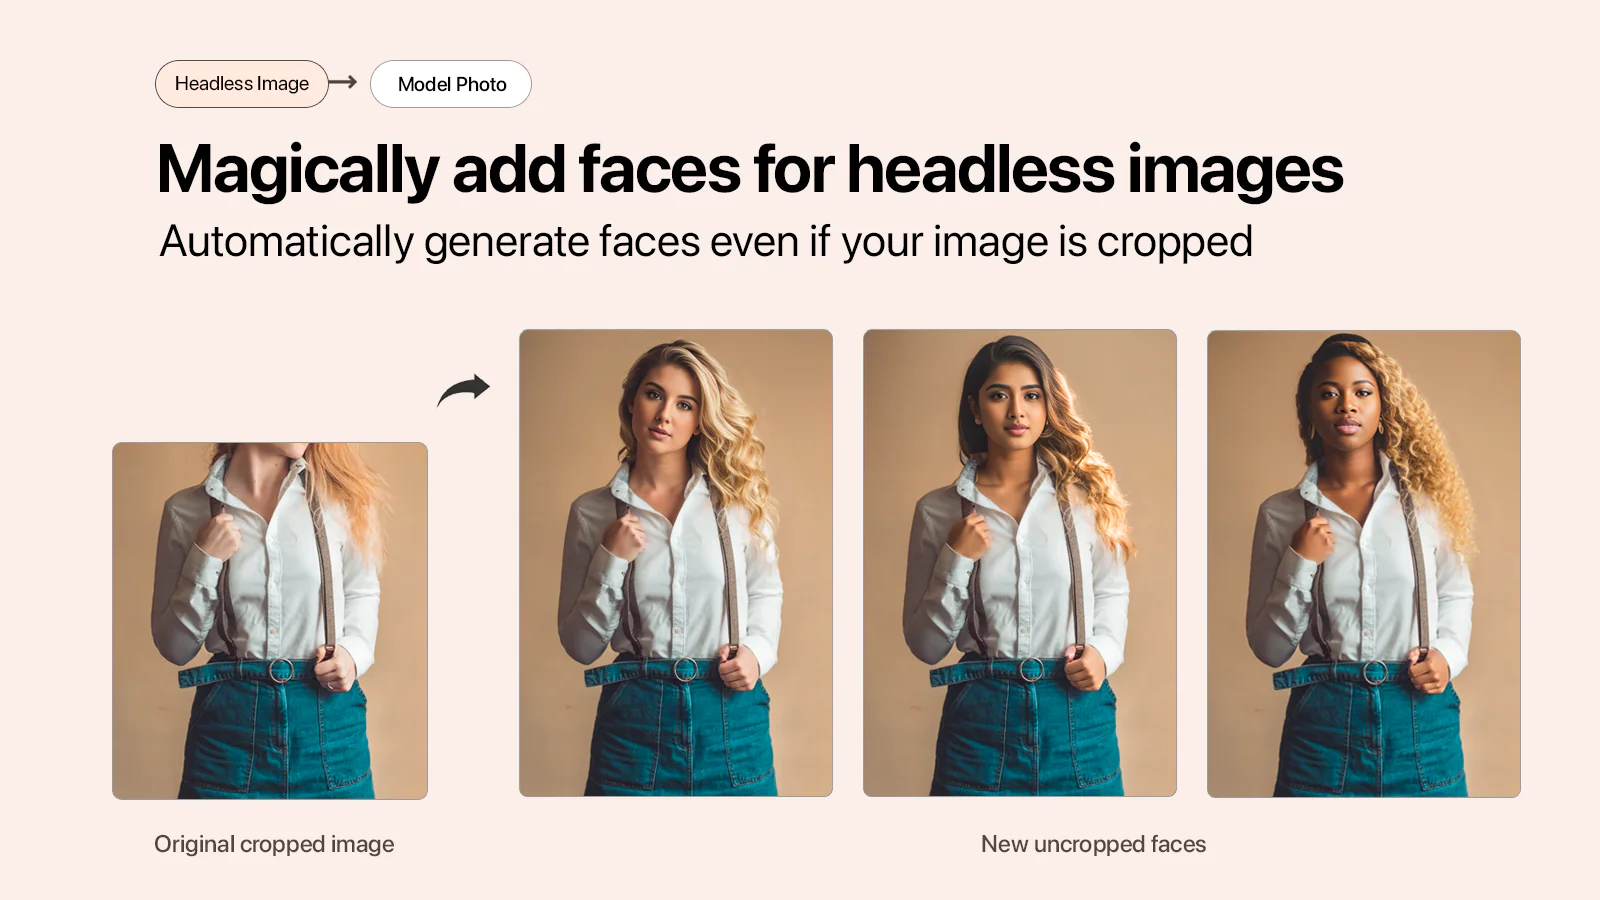 onmodel-ai-models-photos-headless-images